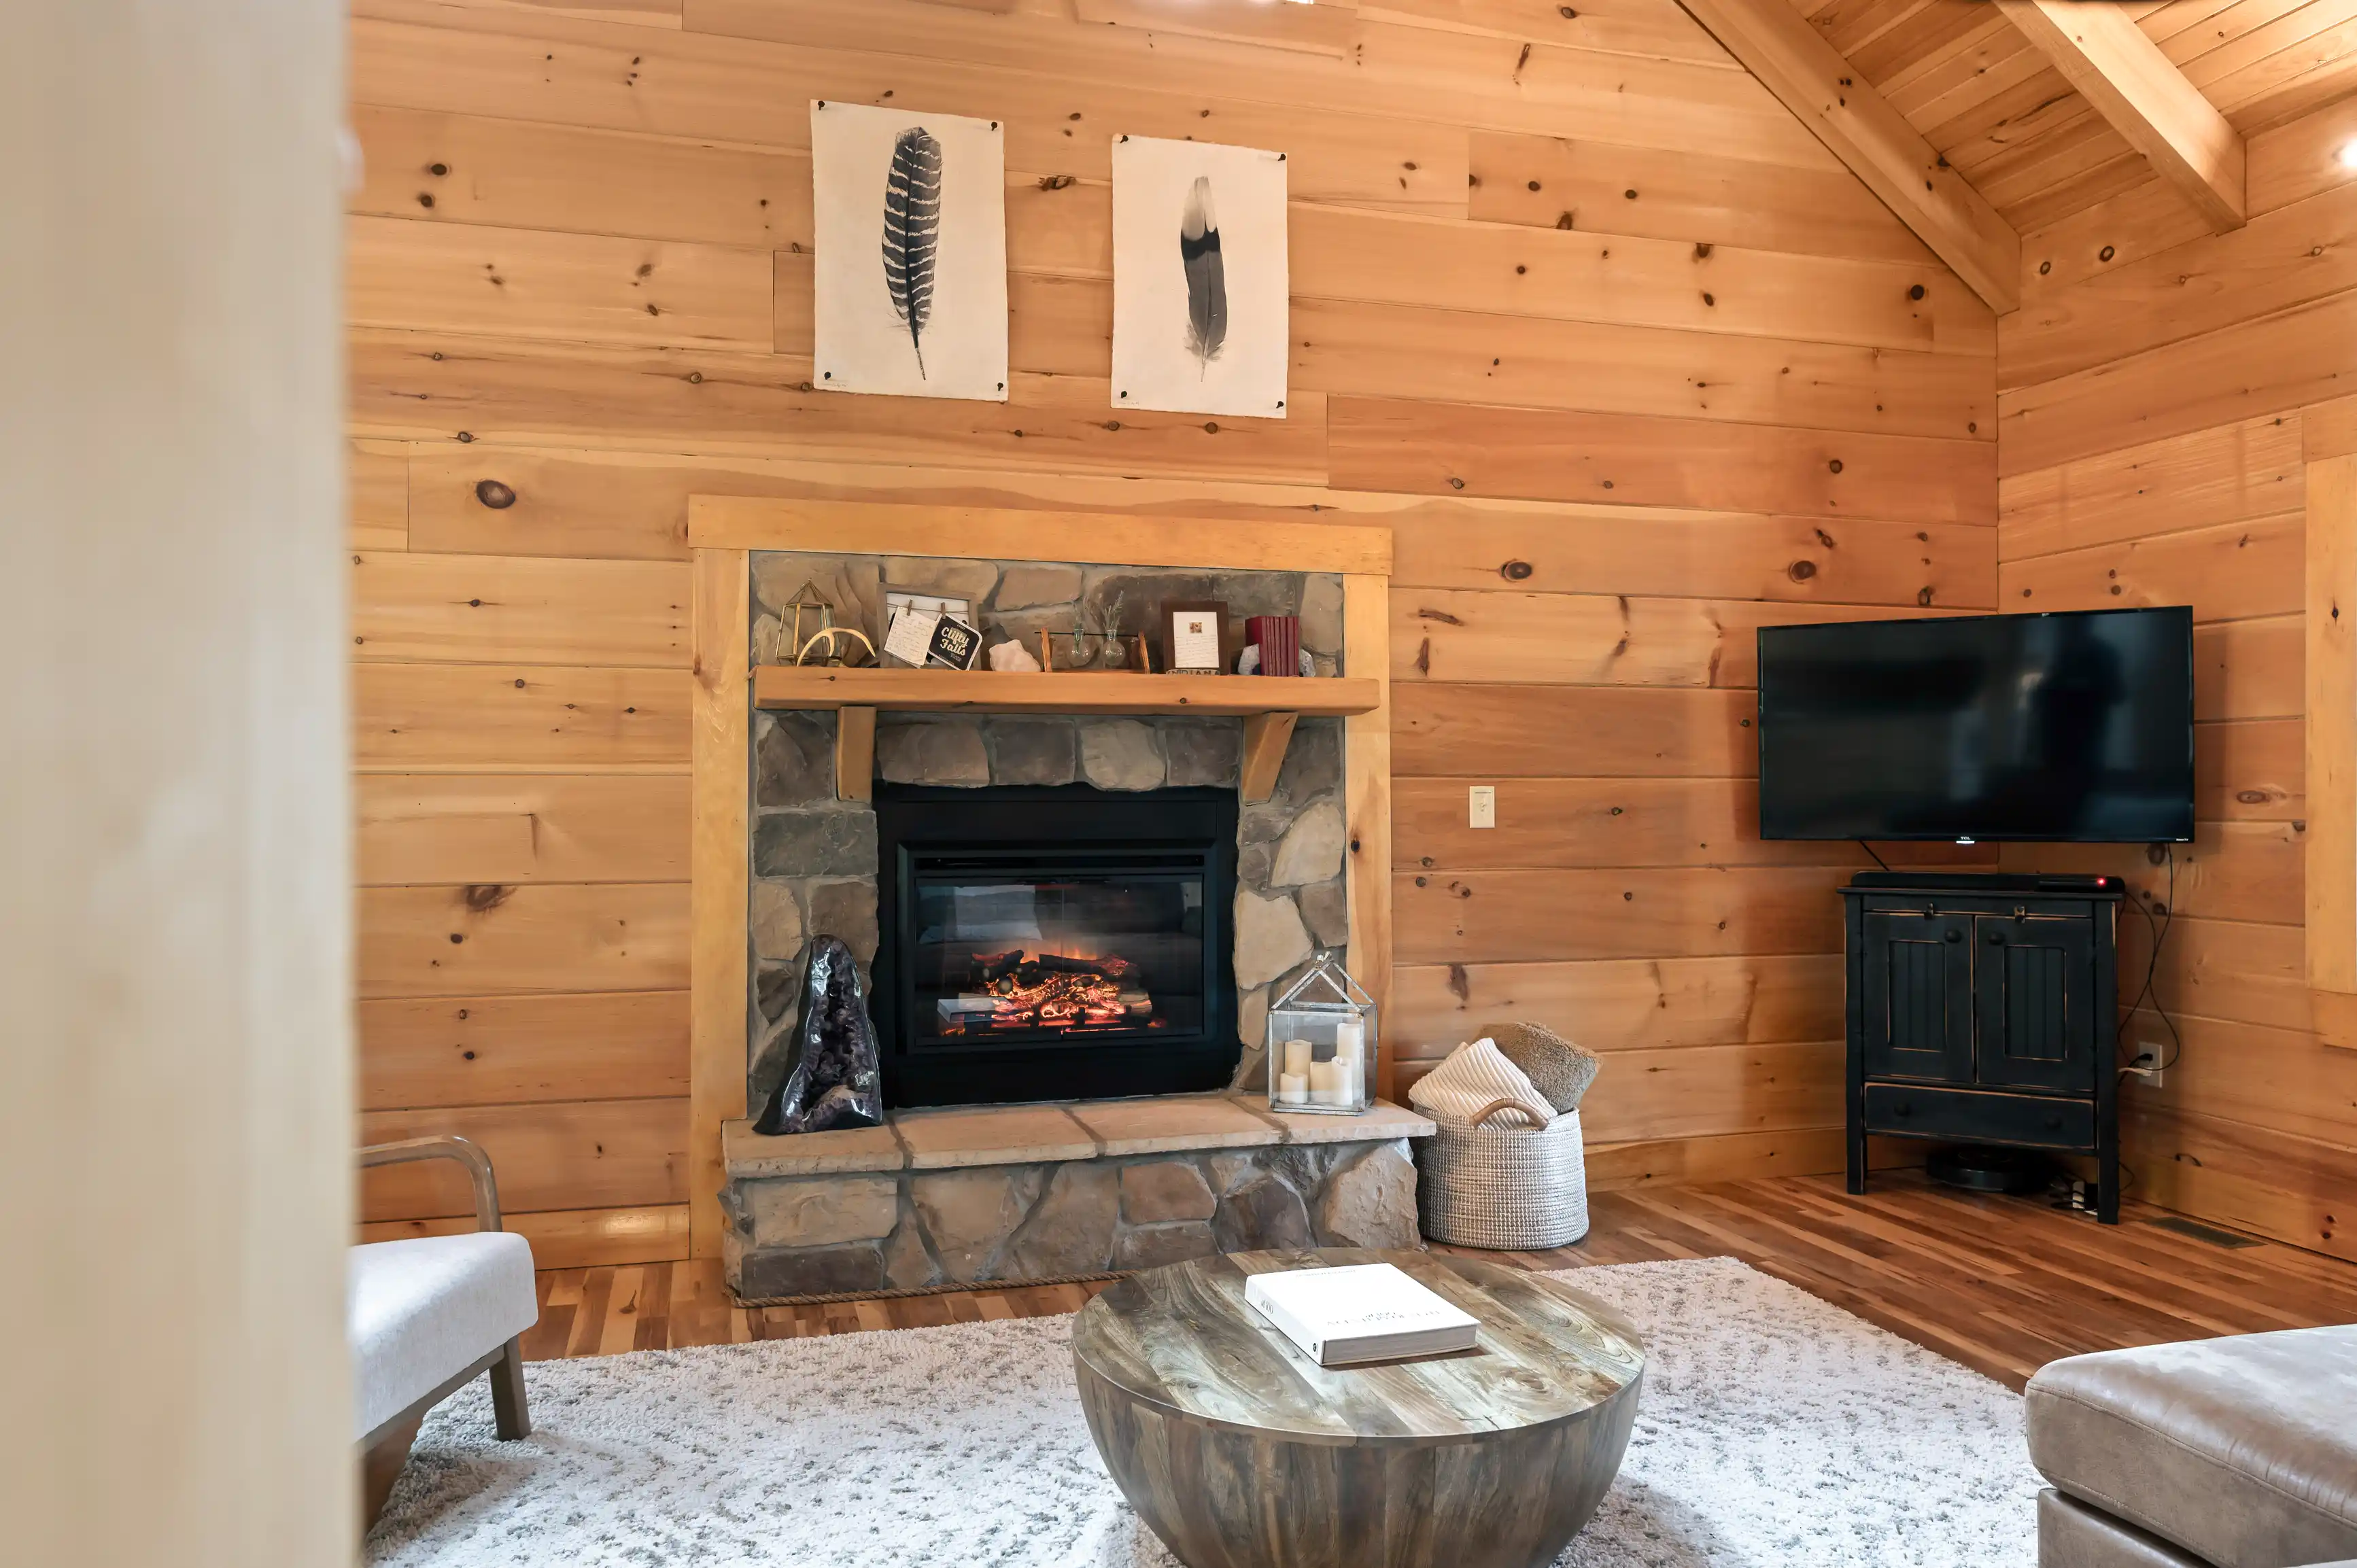 Cozy modern cabin interior with stone fireplace, wall-mounted TV, and wooden walls, decorated with feather art and minimalistic furniture.